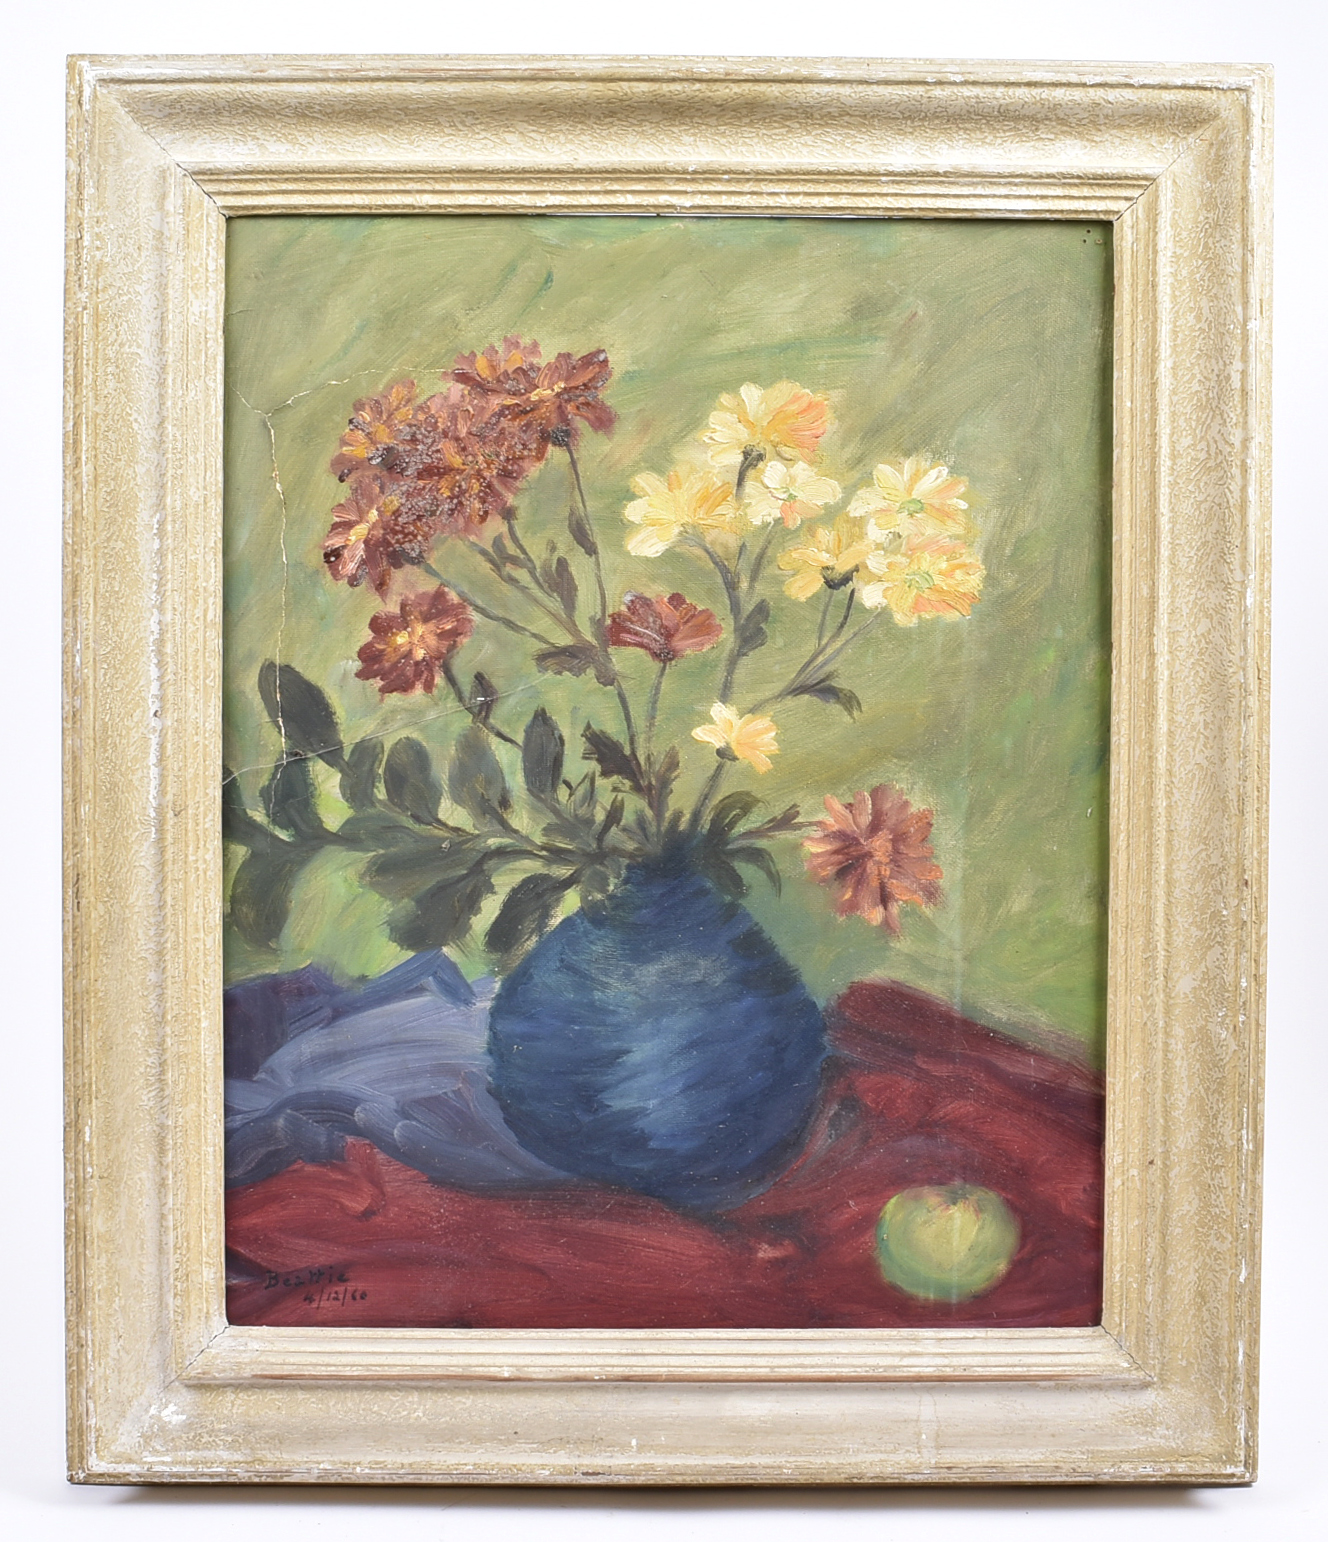 20th Century British School oil on board, 'Still Life with Vase of Flowers' signed and dated ' - Image 2 of 2